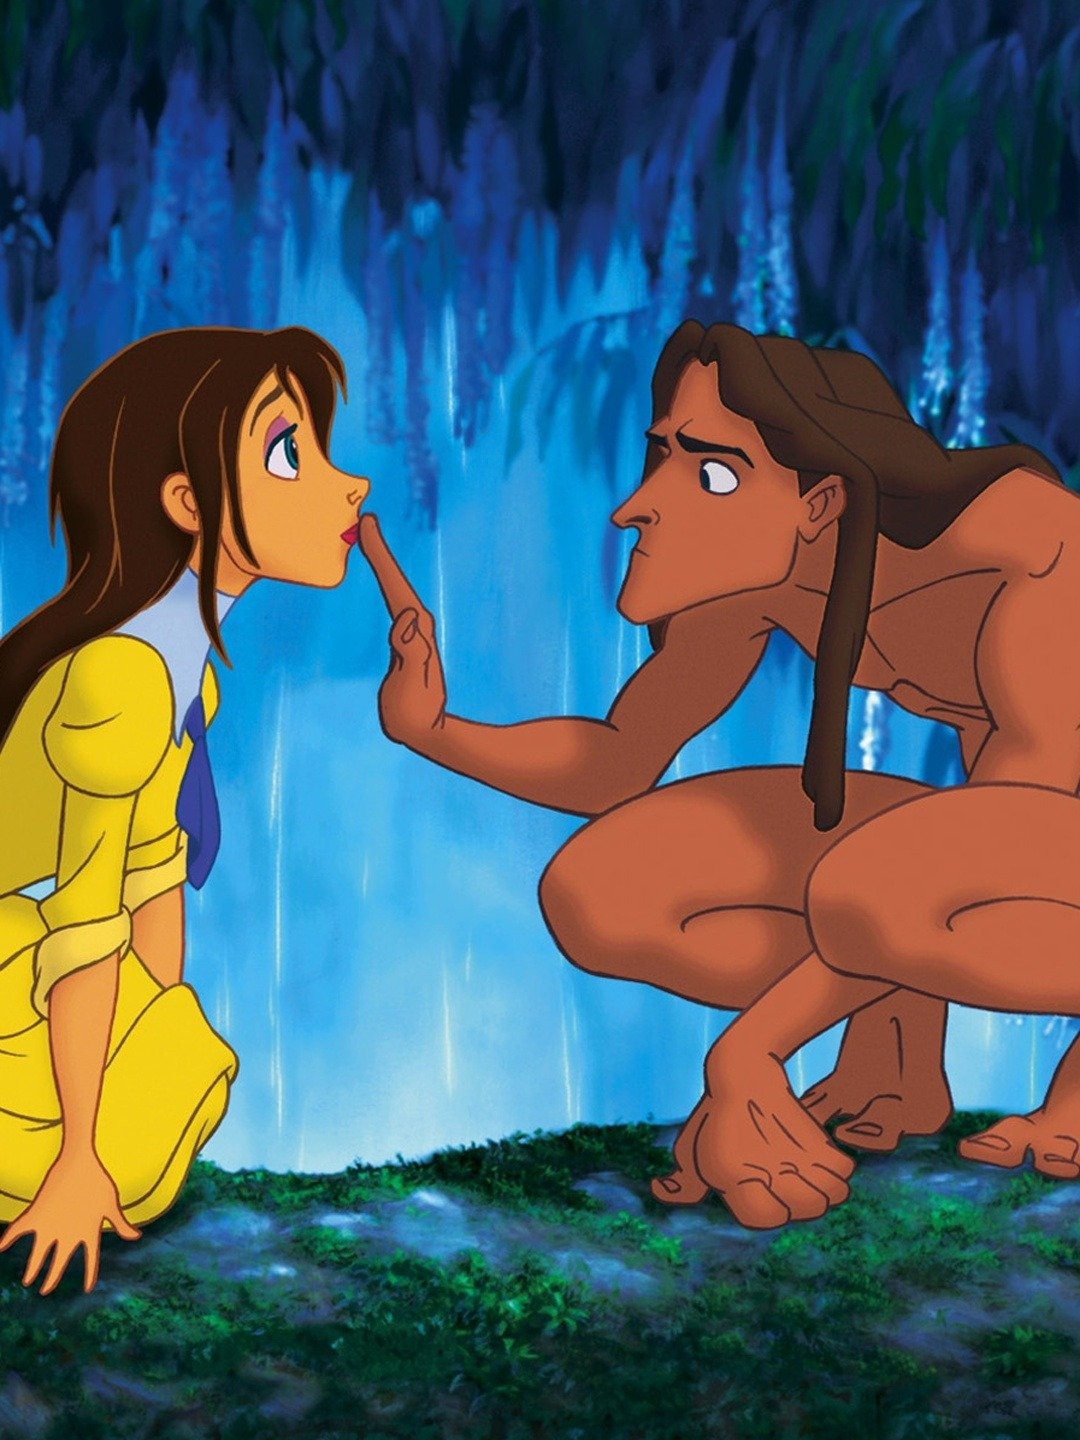 bill wald recommends Images Of Tarzan And Jane